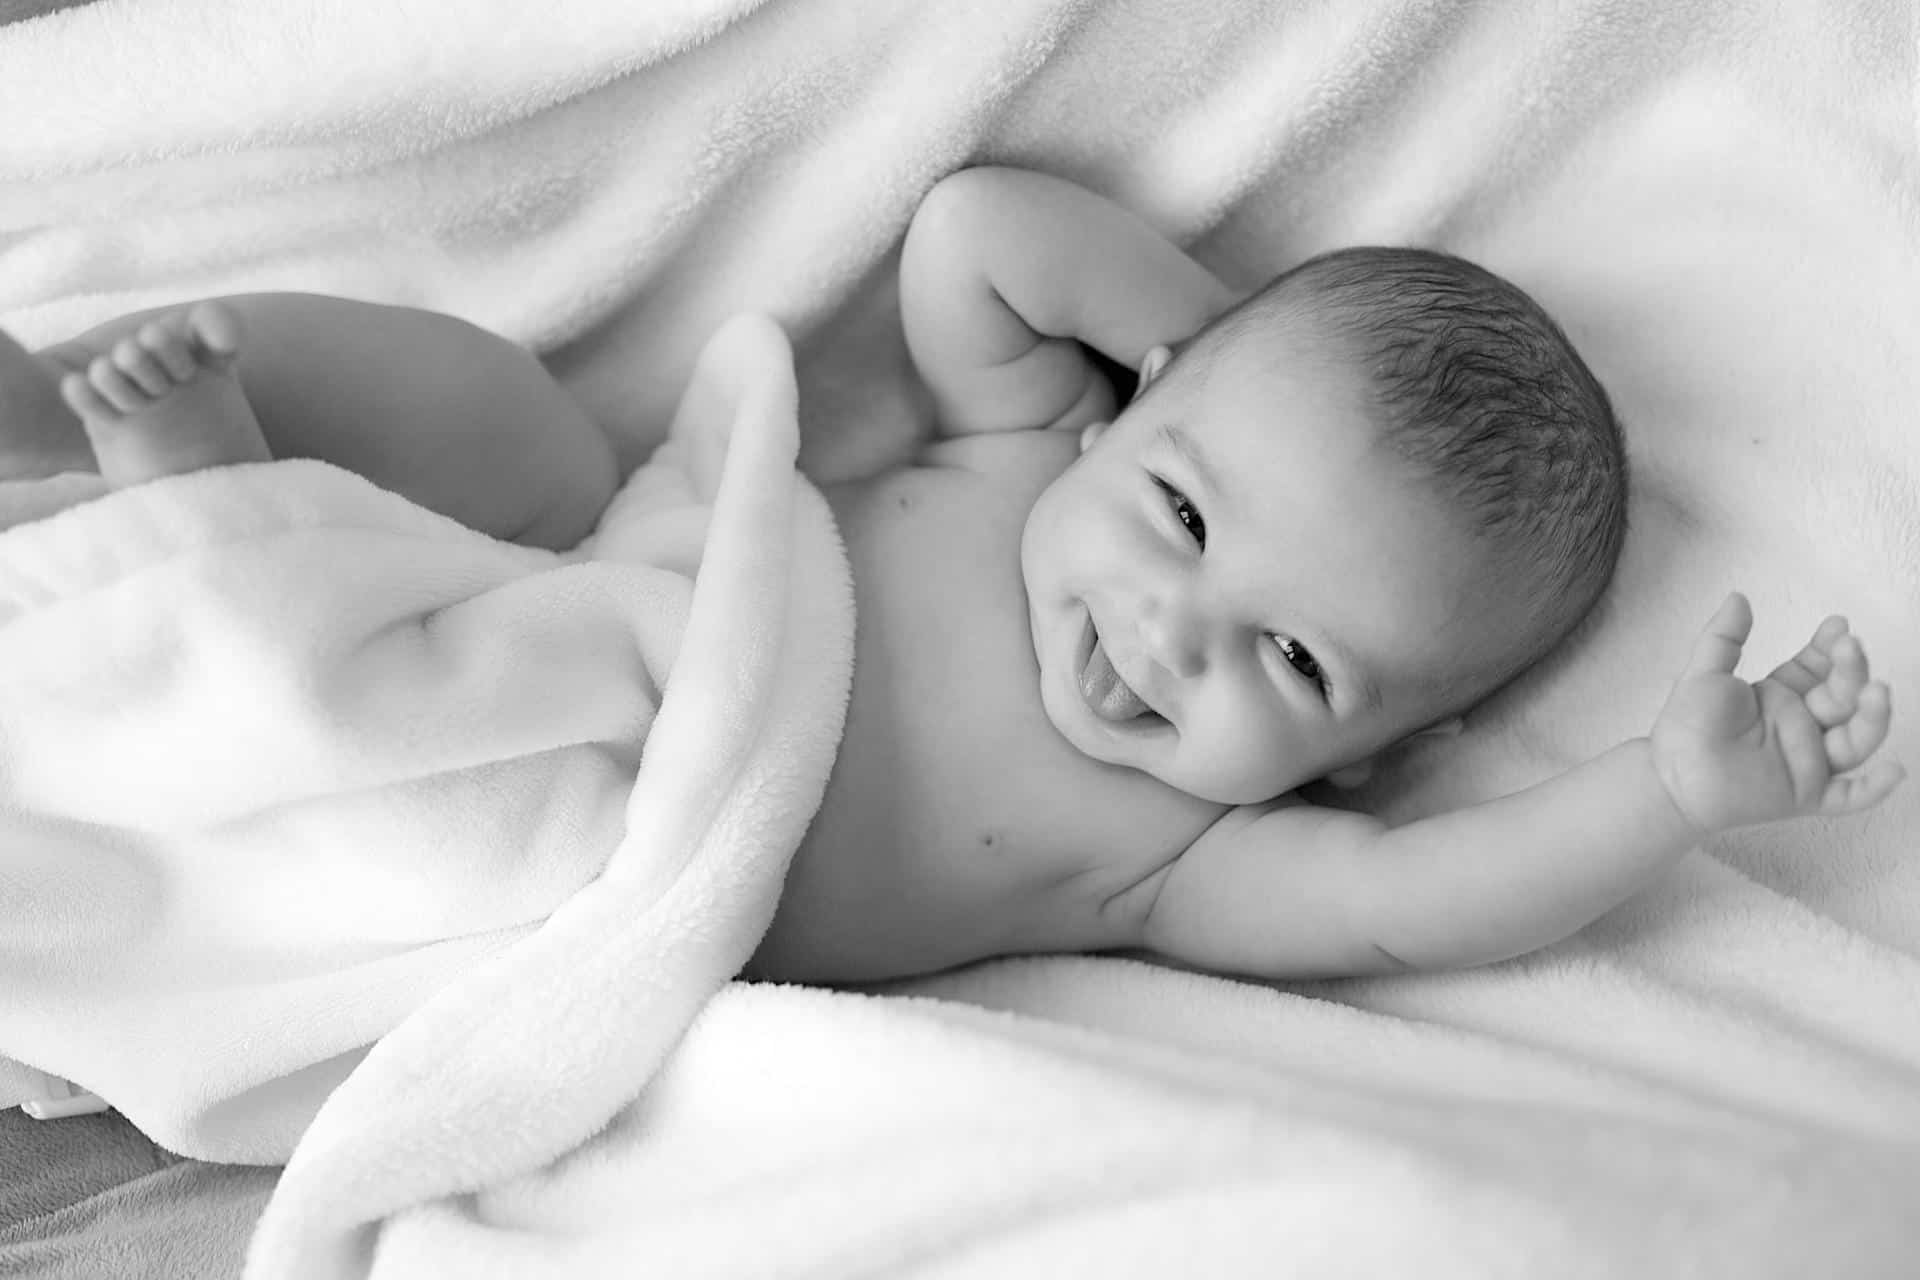 A baby smiling on a blanket